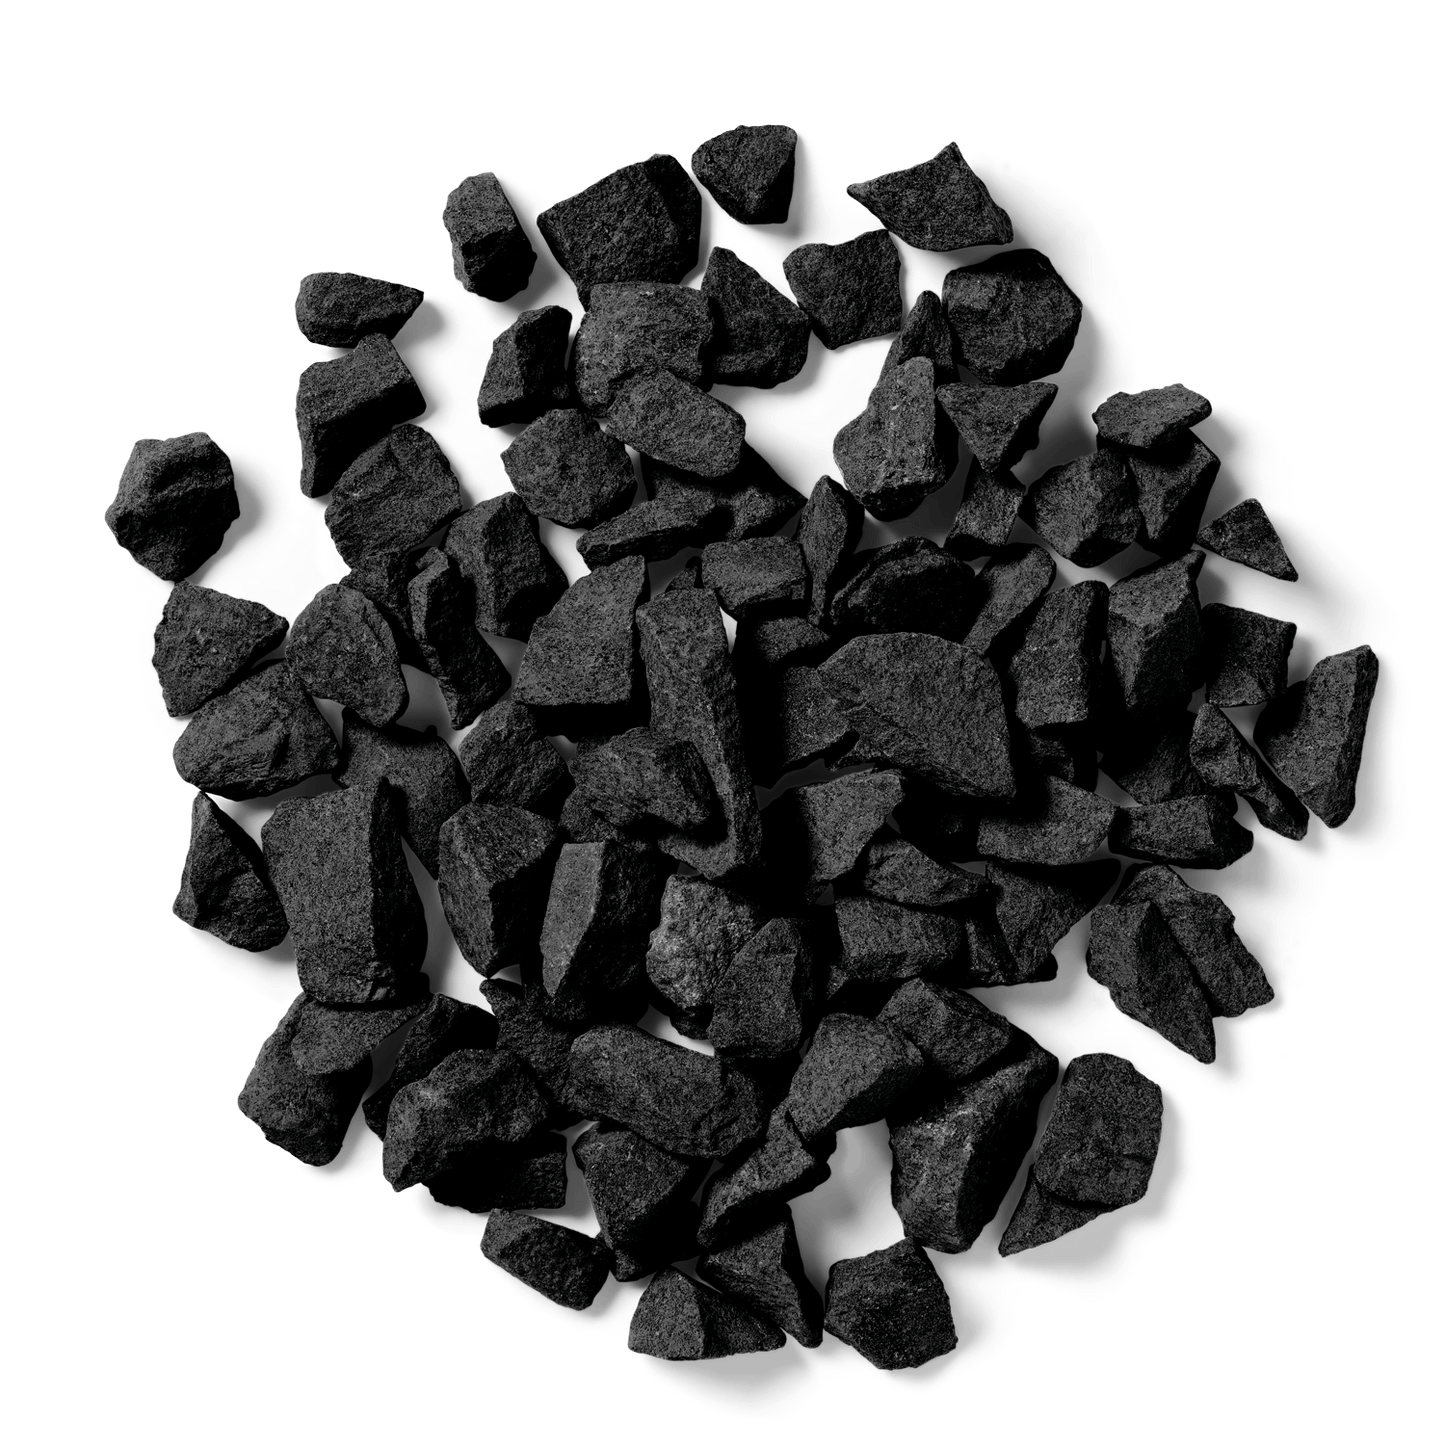 Gardening  -  Altico A10014 Meteor Black Stone Chippings  -  60003130